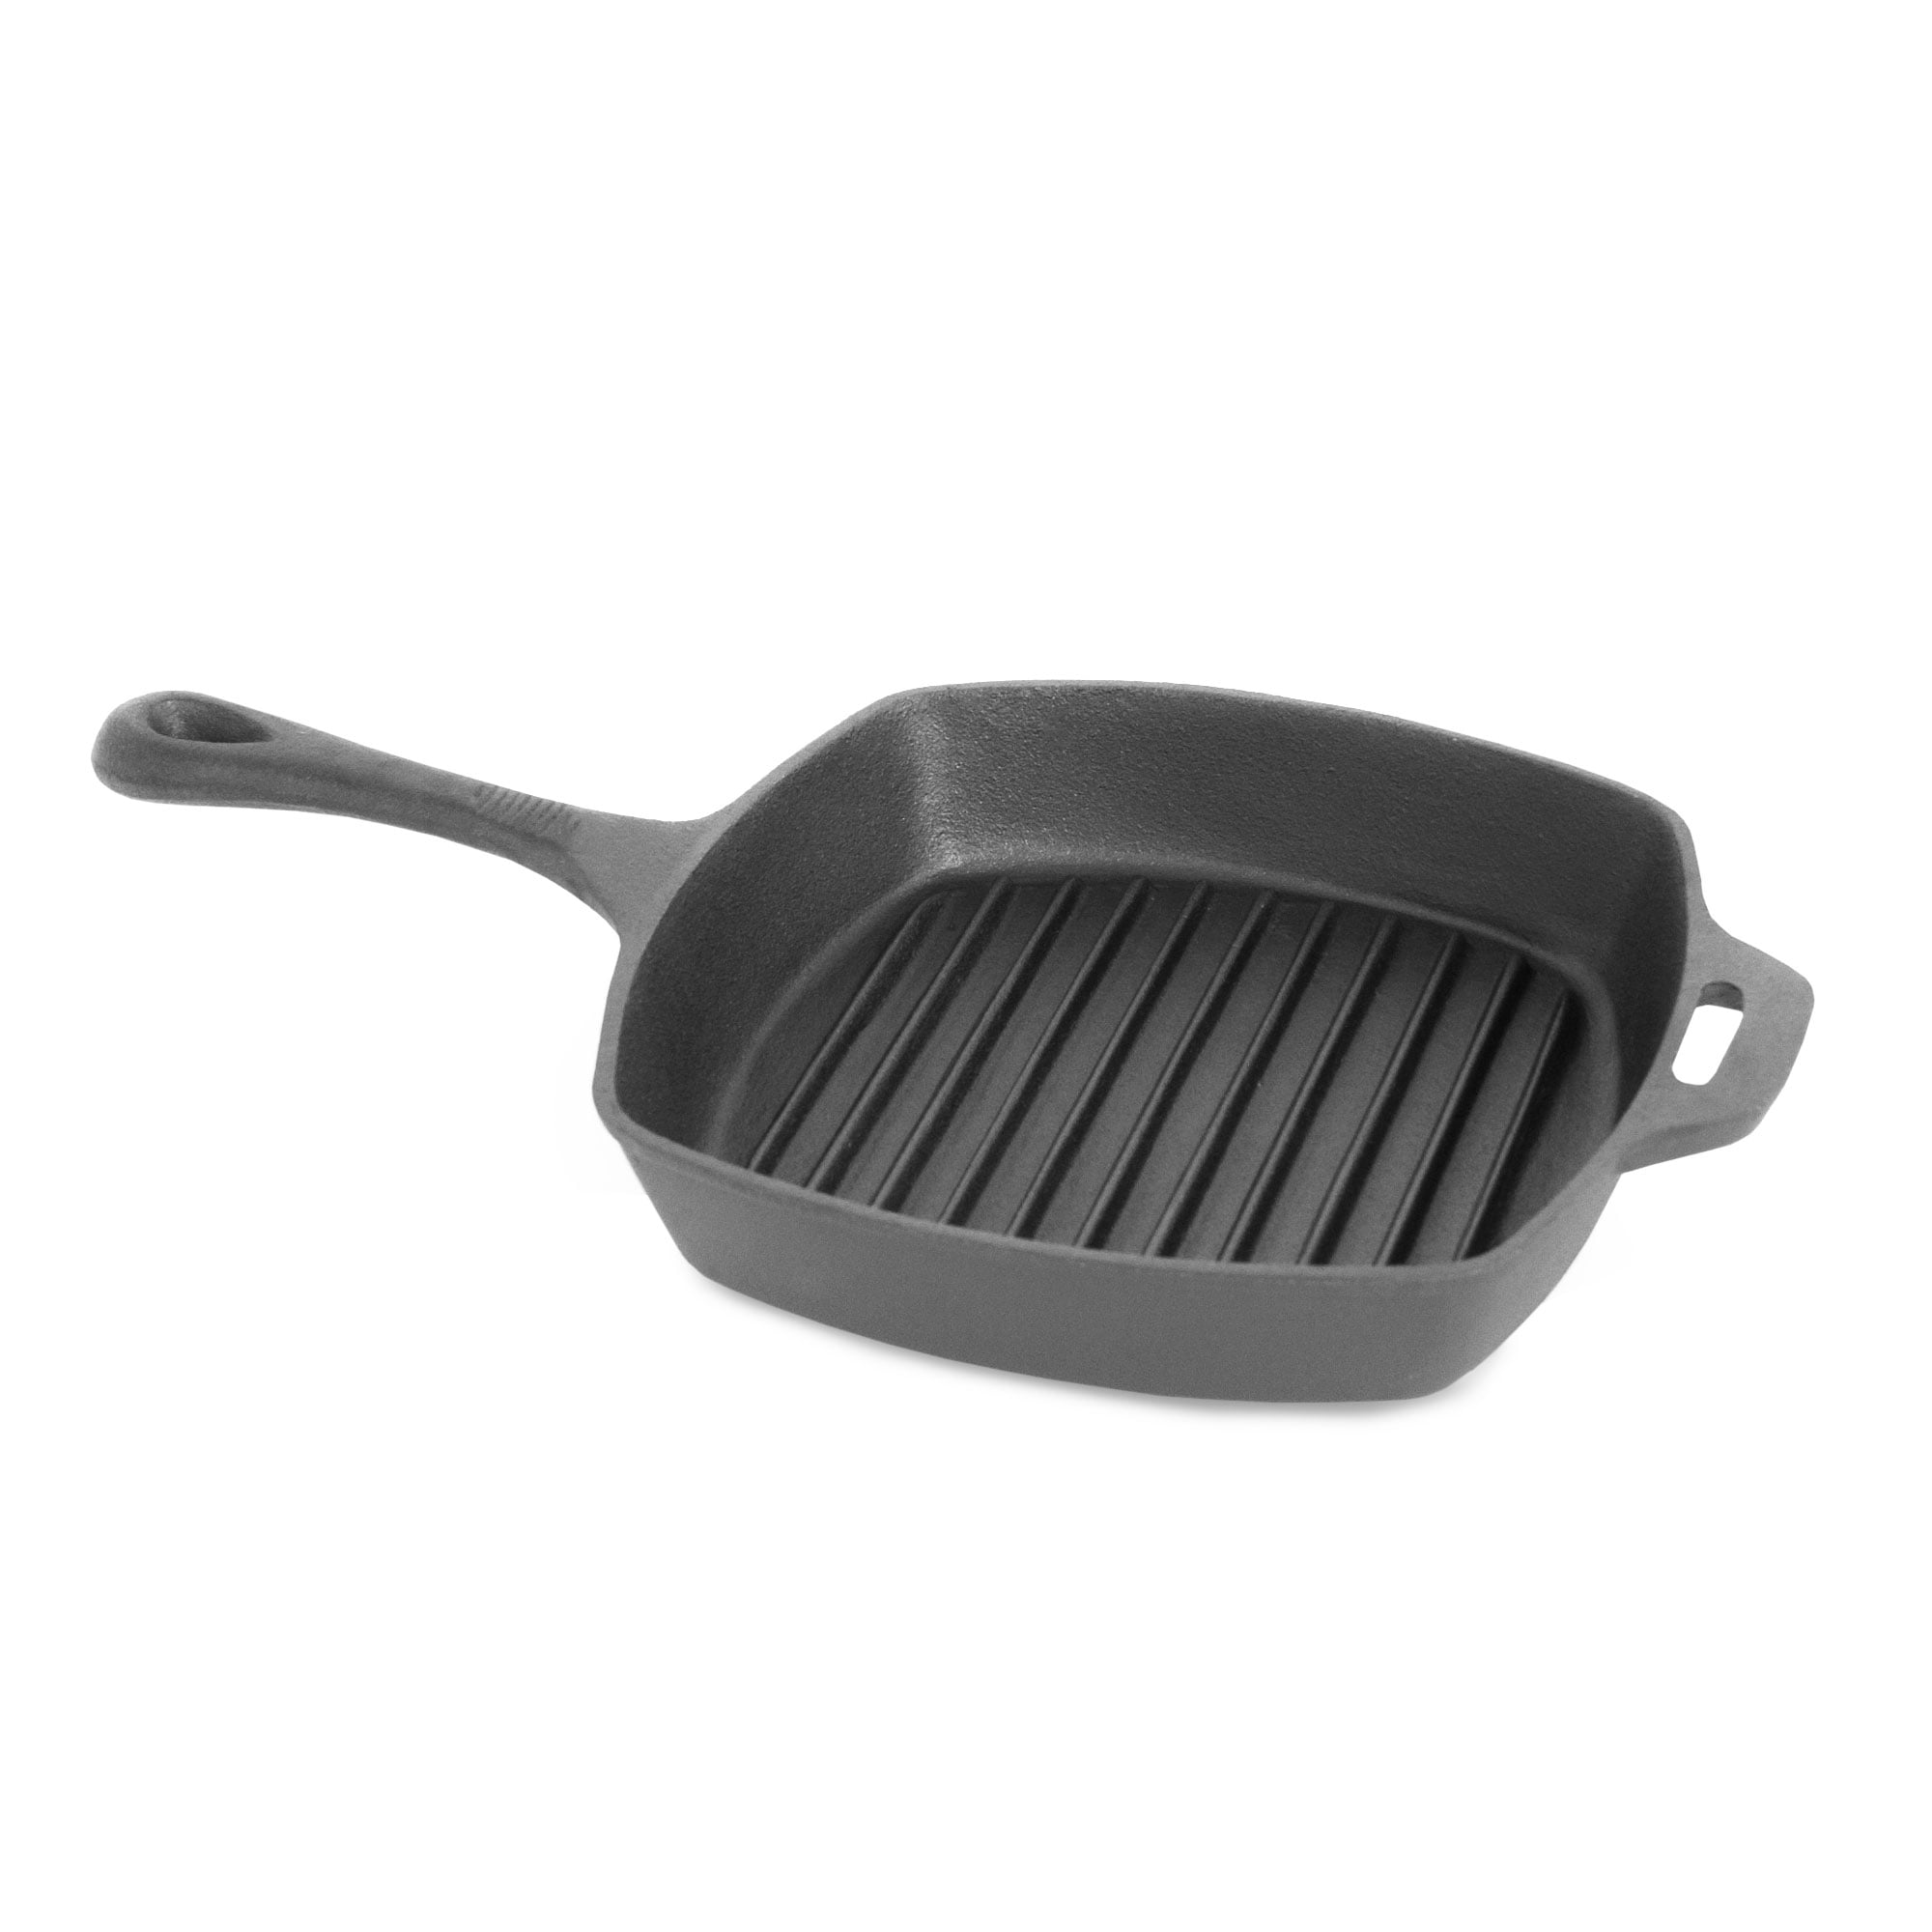 LODGE 10.5″ SEASONED SQUARE CAST IRON GRILL PAN – General Army Navy Outdoor